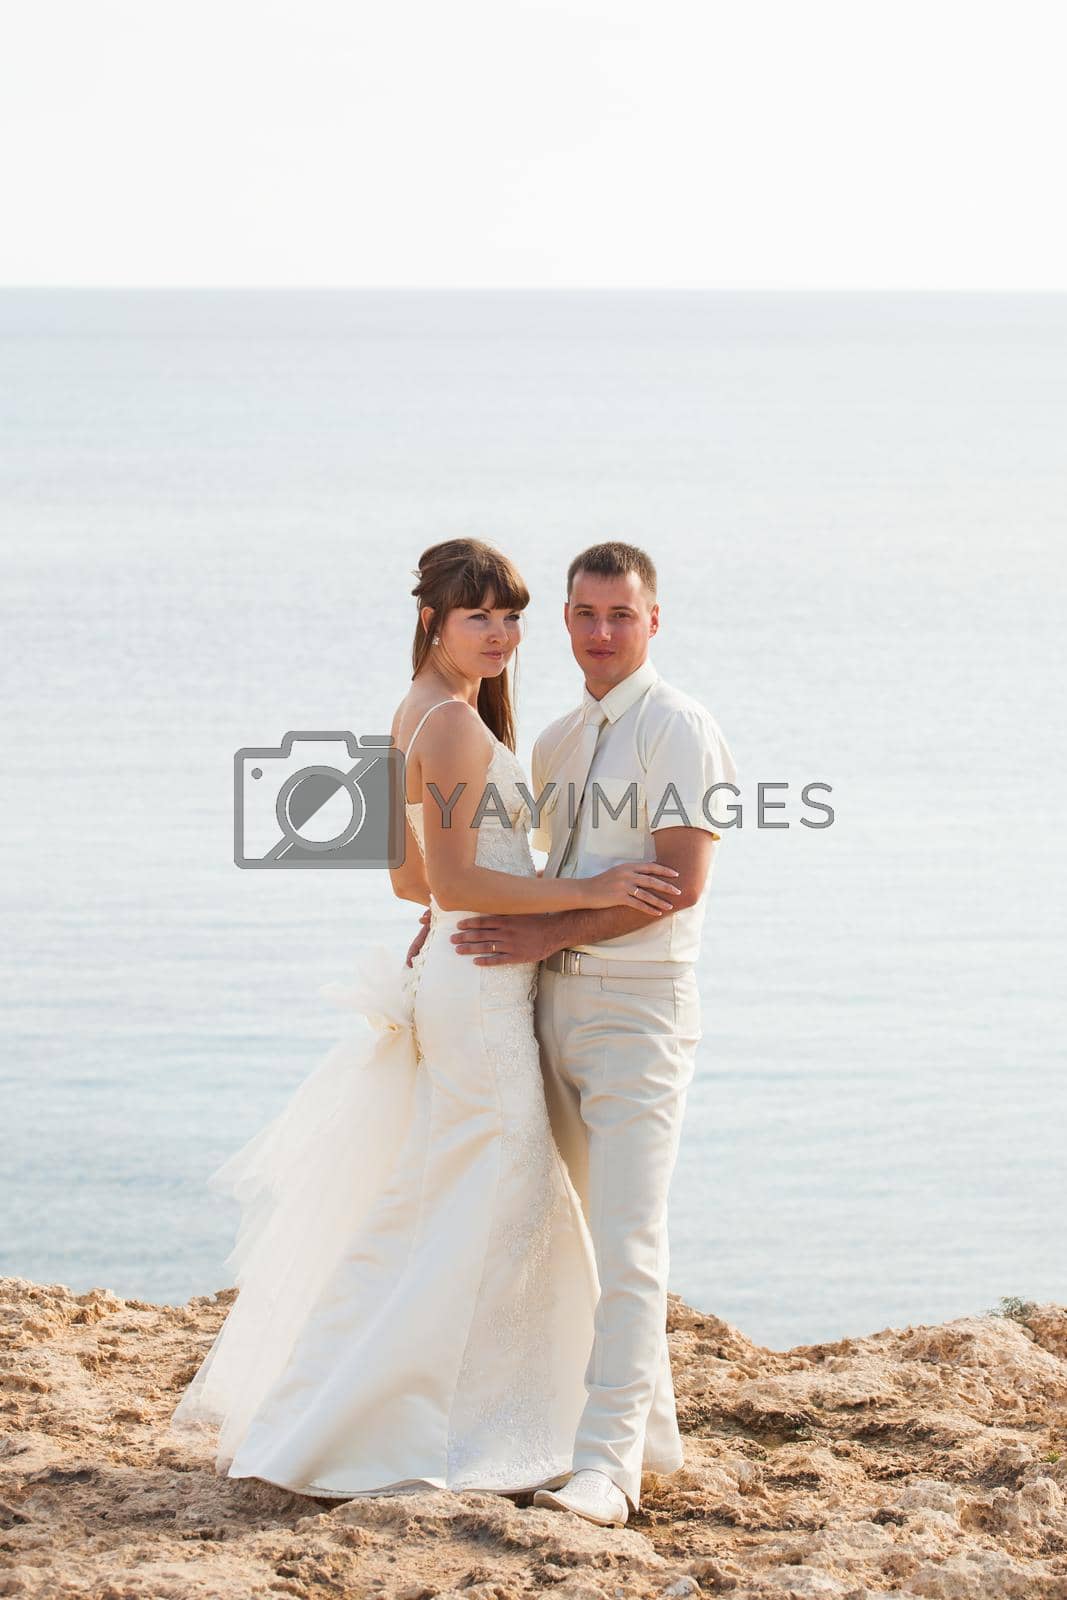 Royalty free image of Just married couple embraced by Satura86